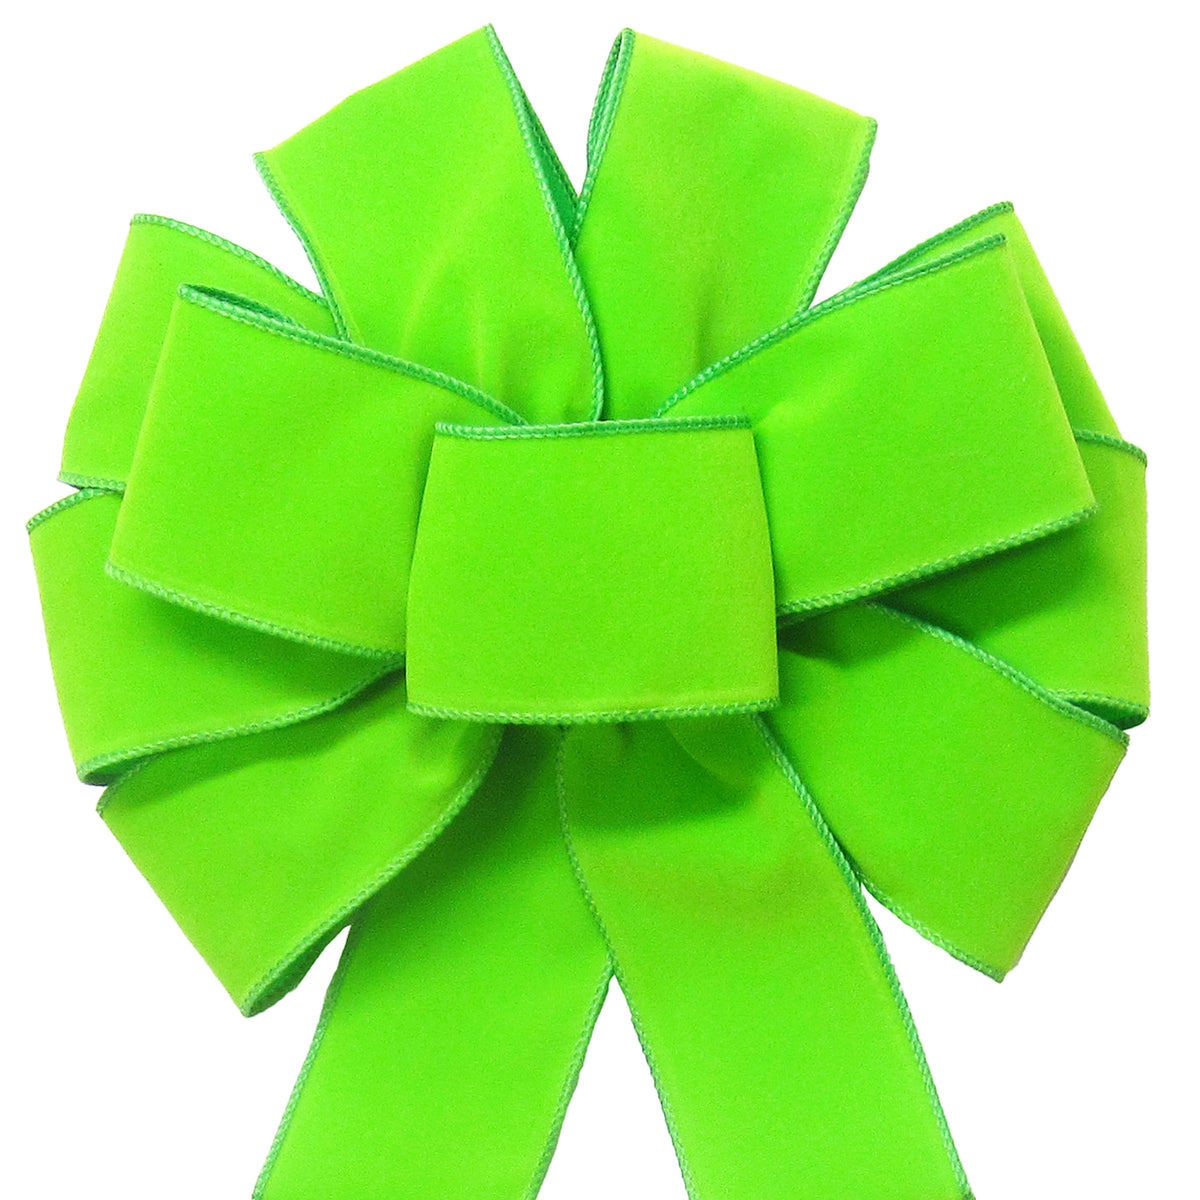 Hand tied Bows - Wired Indoor Outdoor Black Velvet Bow 10 Inch